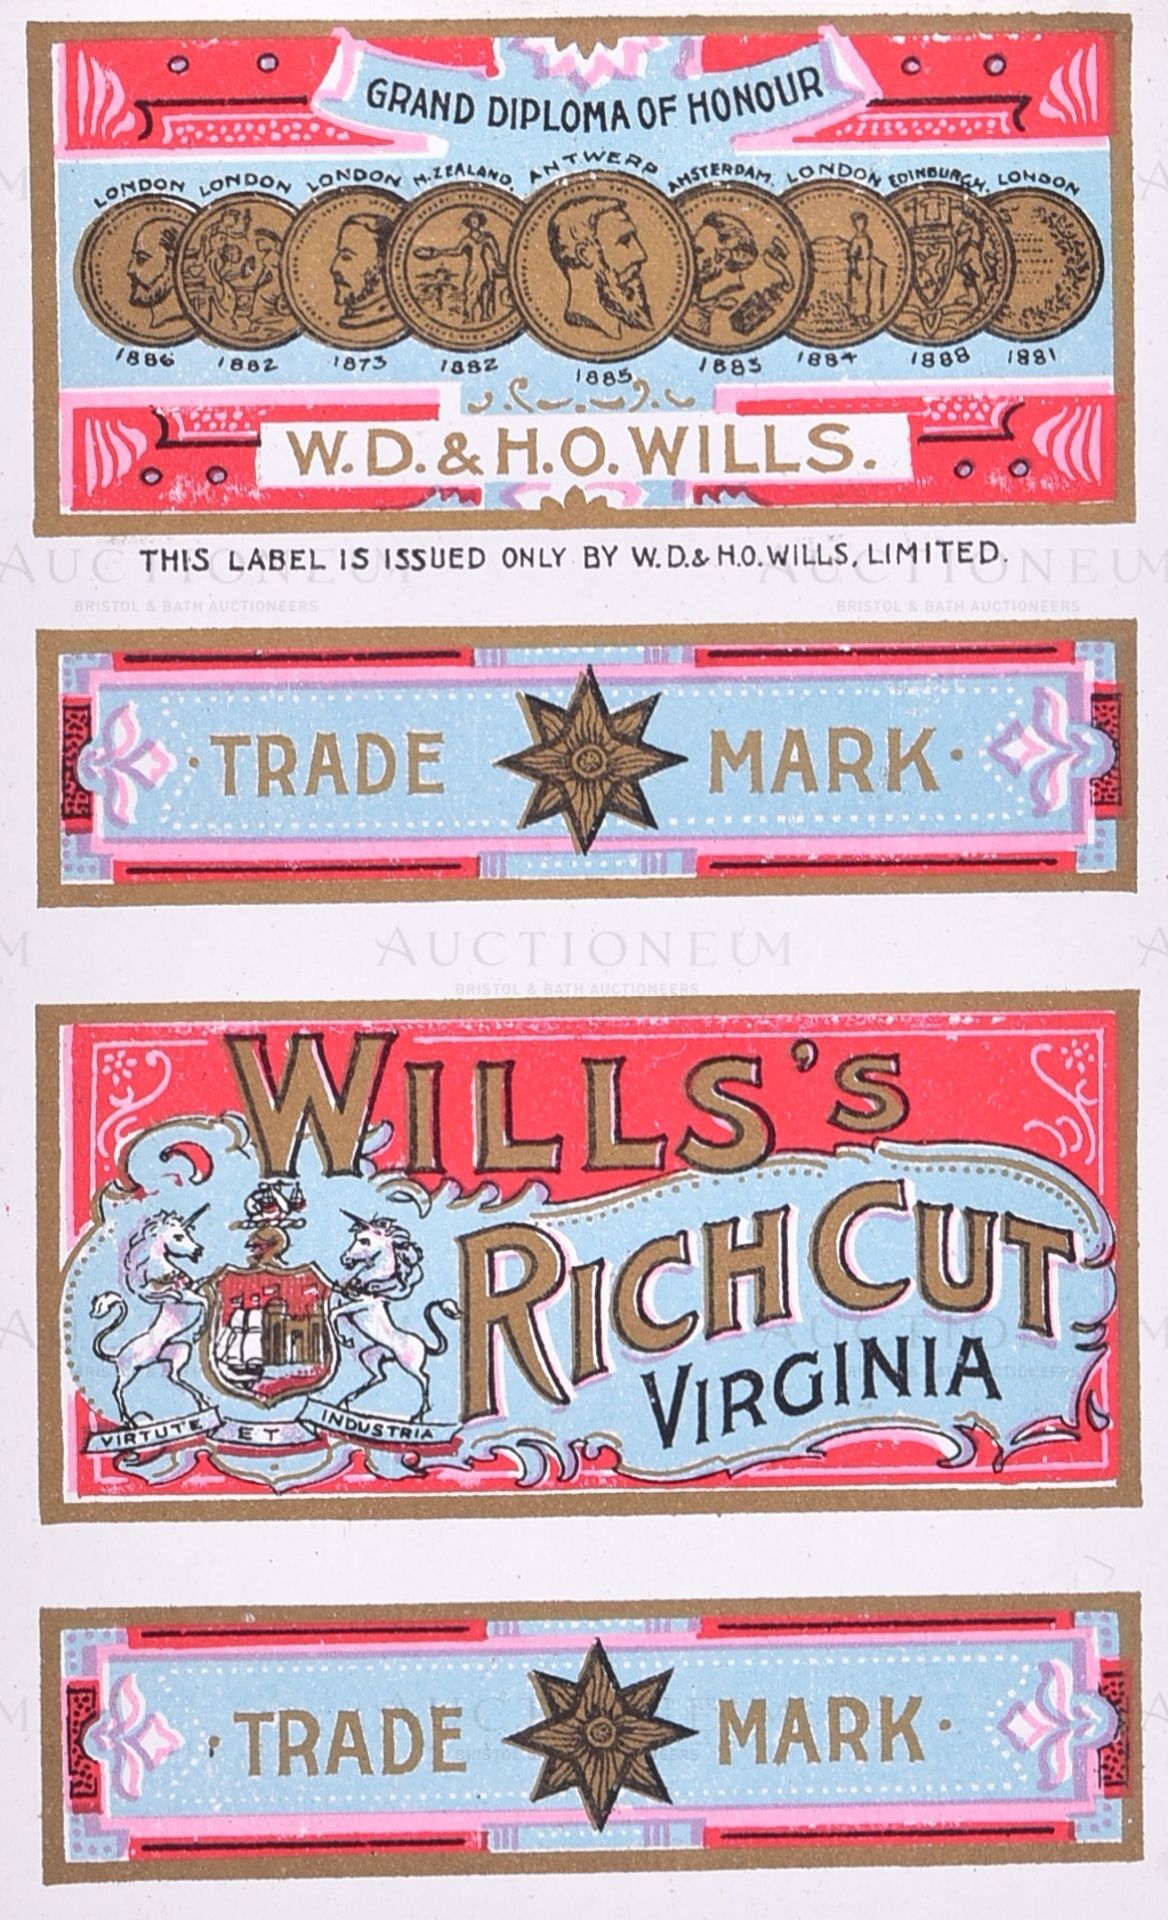 MARDON, SON & HALL - EARLY 20TH CENTURY CIGARETTE PACKET DESIGNS - Image 3 of 7